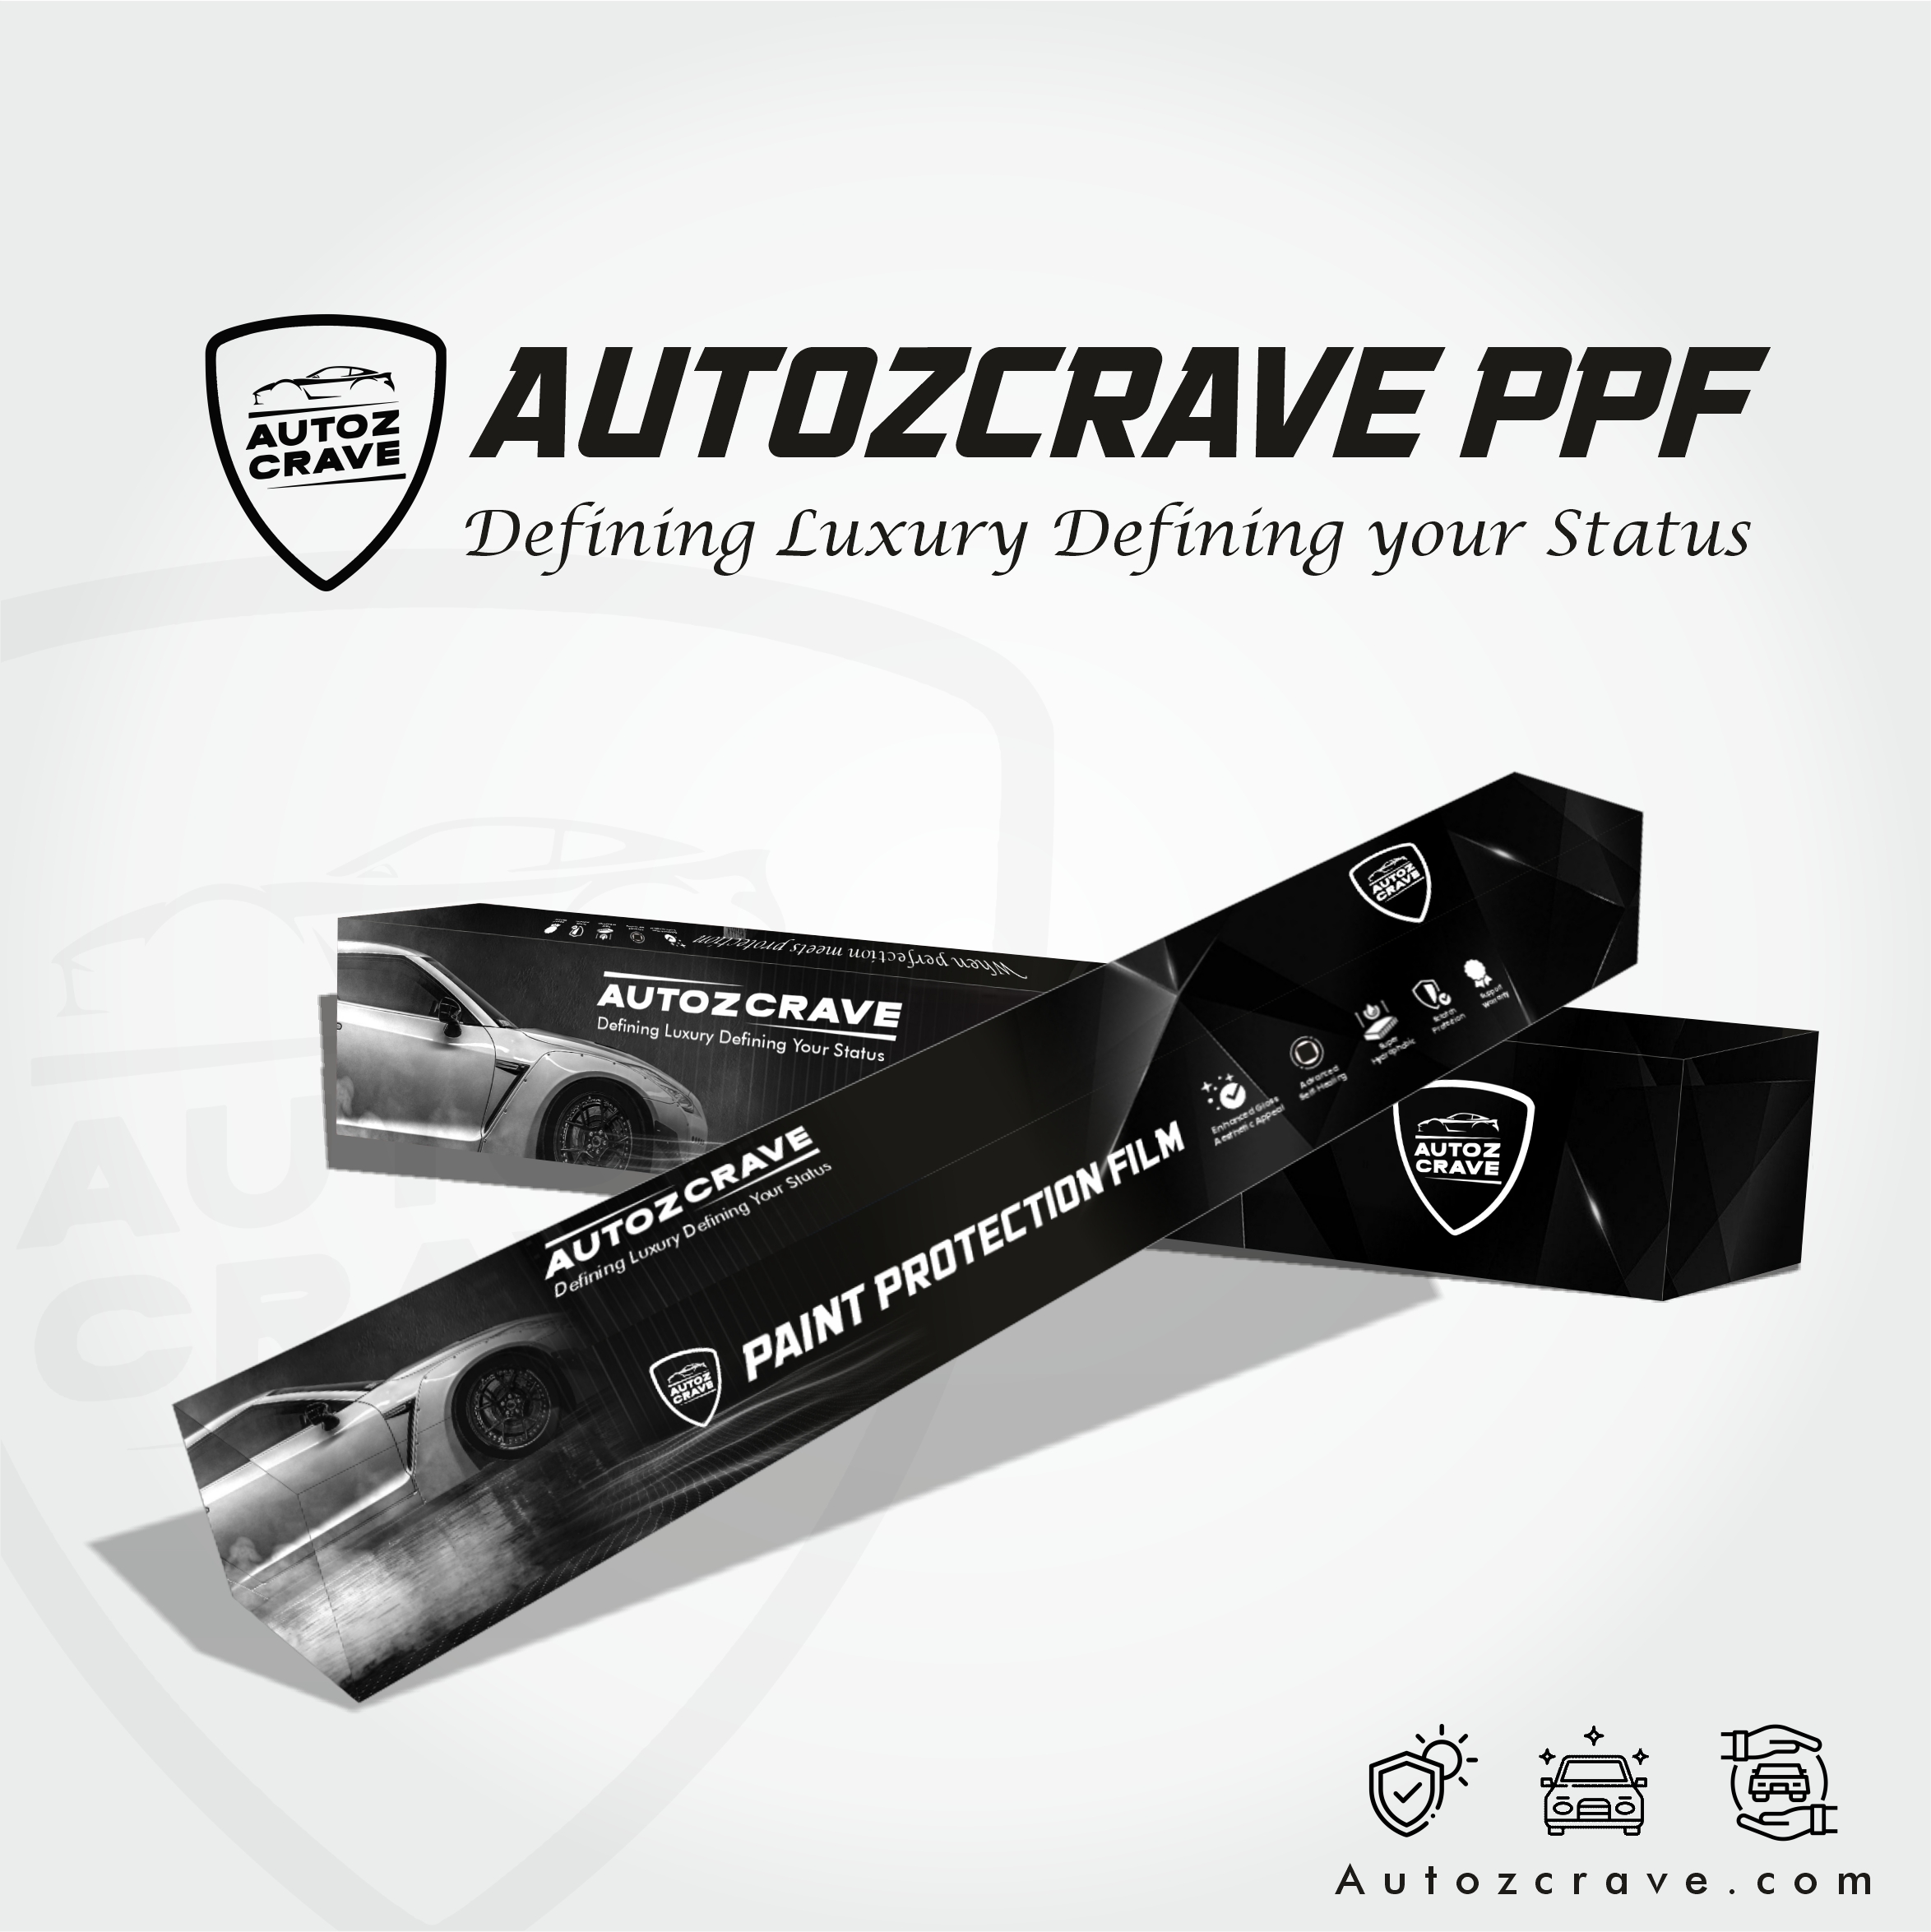 PAINT PROTECTION FILM BY AUTOZCRAVE PPF WITH ANTI YELLOW FEATURES (A-190)